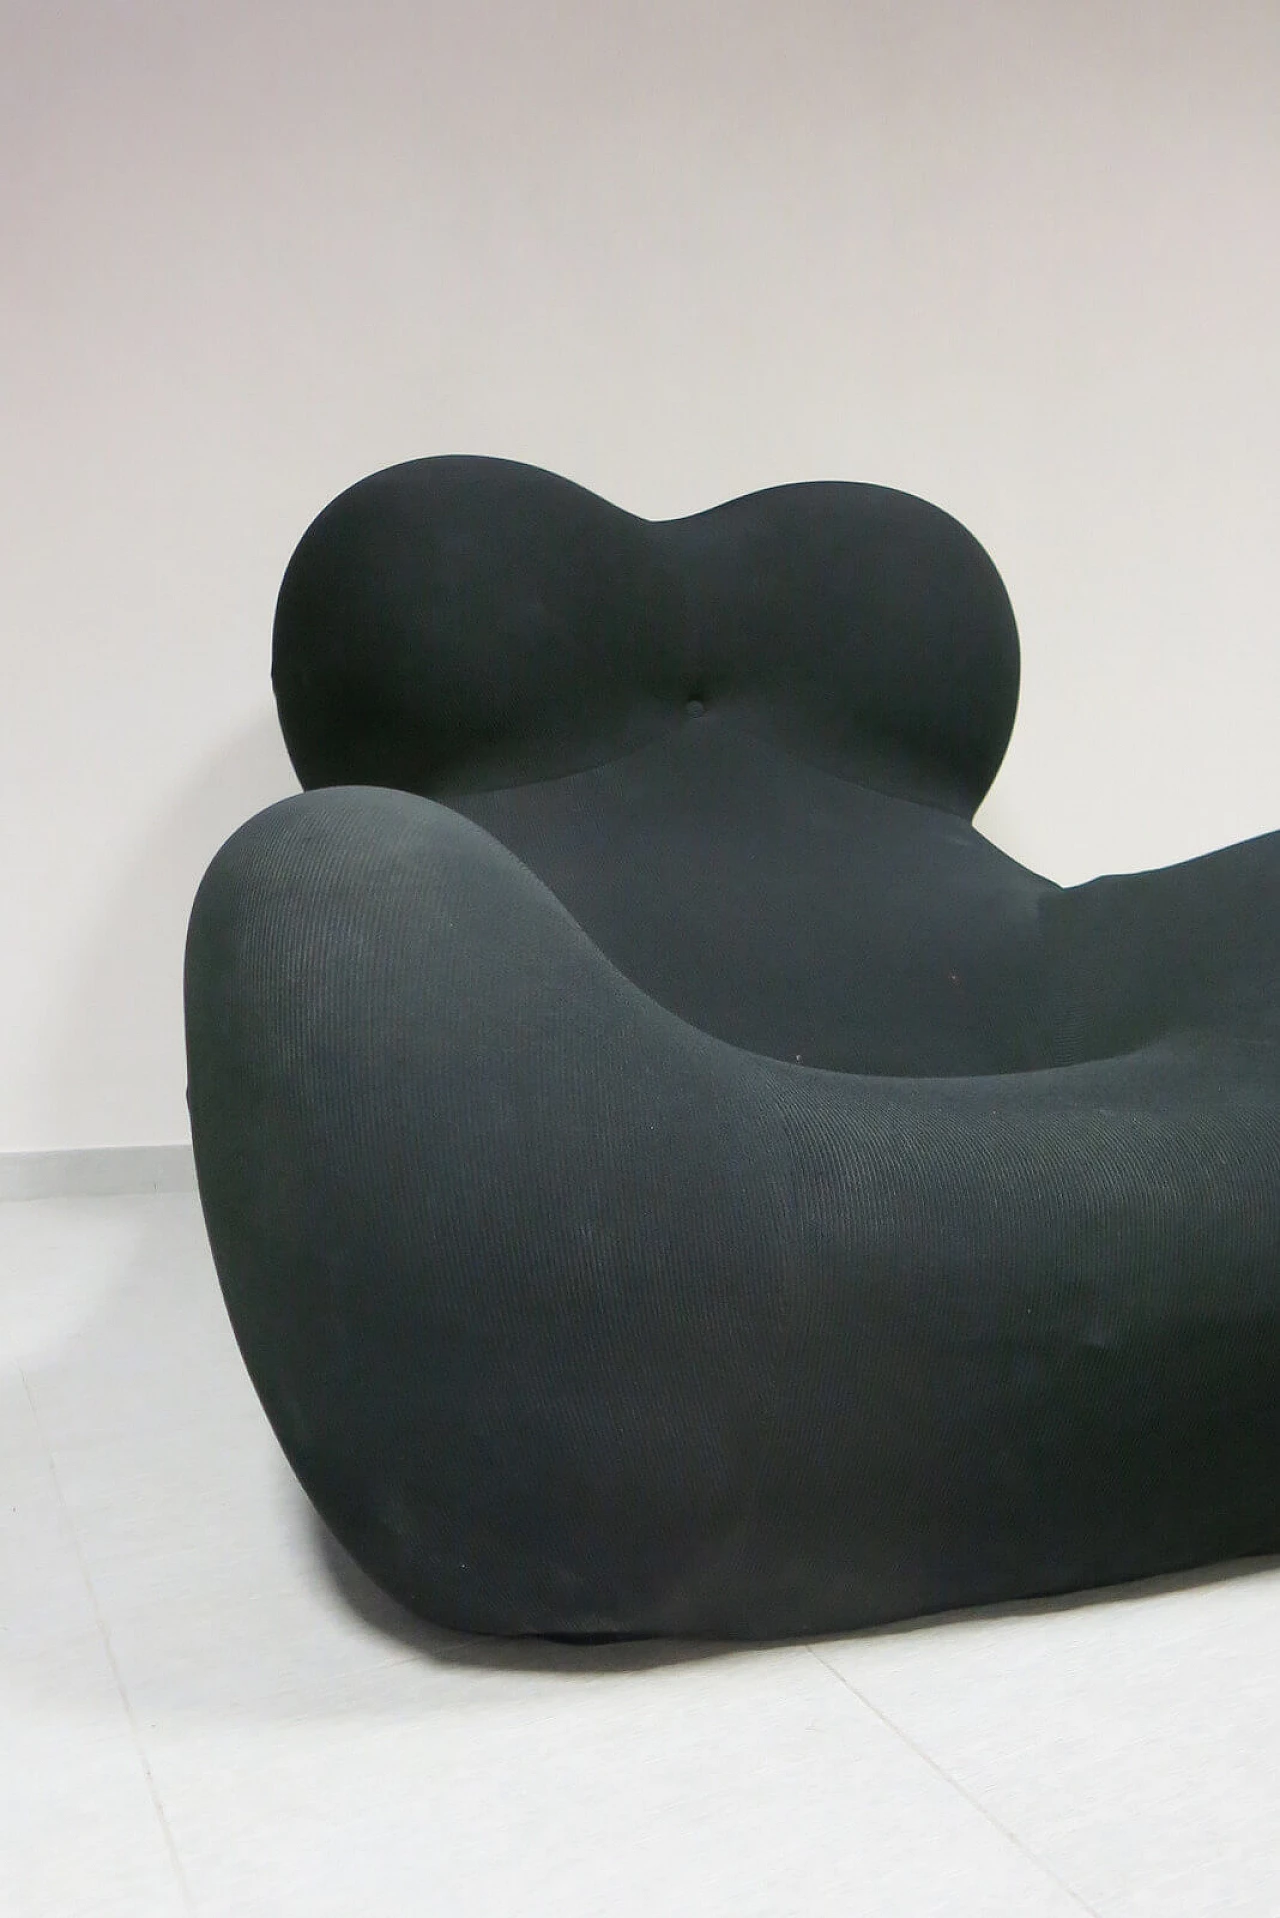 Black "Up5" armchair and "UP2" pouf by Gaetano Pesce for C&B 4